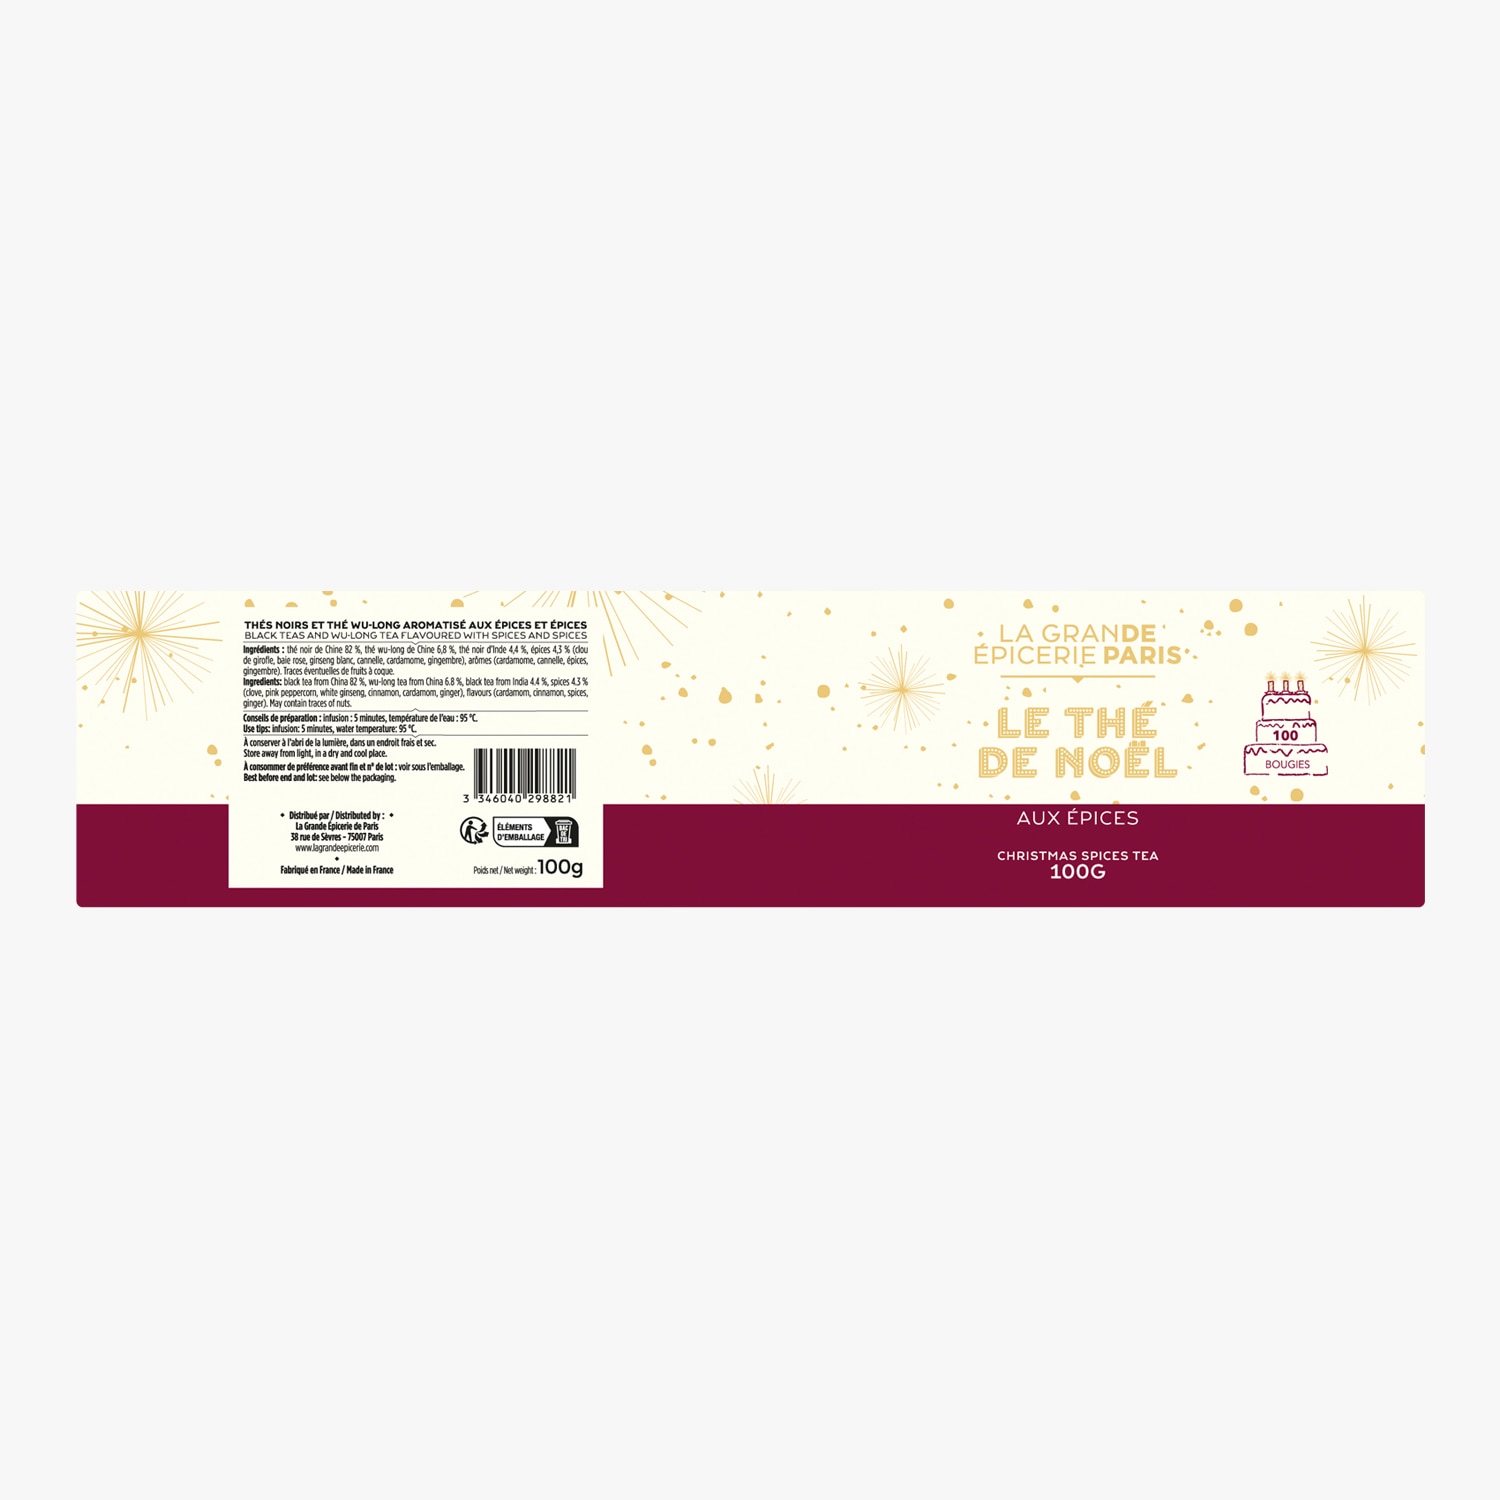 Thé Interdit Incense sticks by Mariages Frères